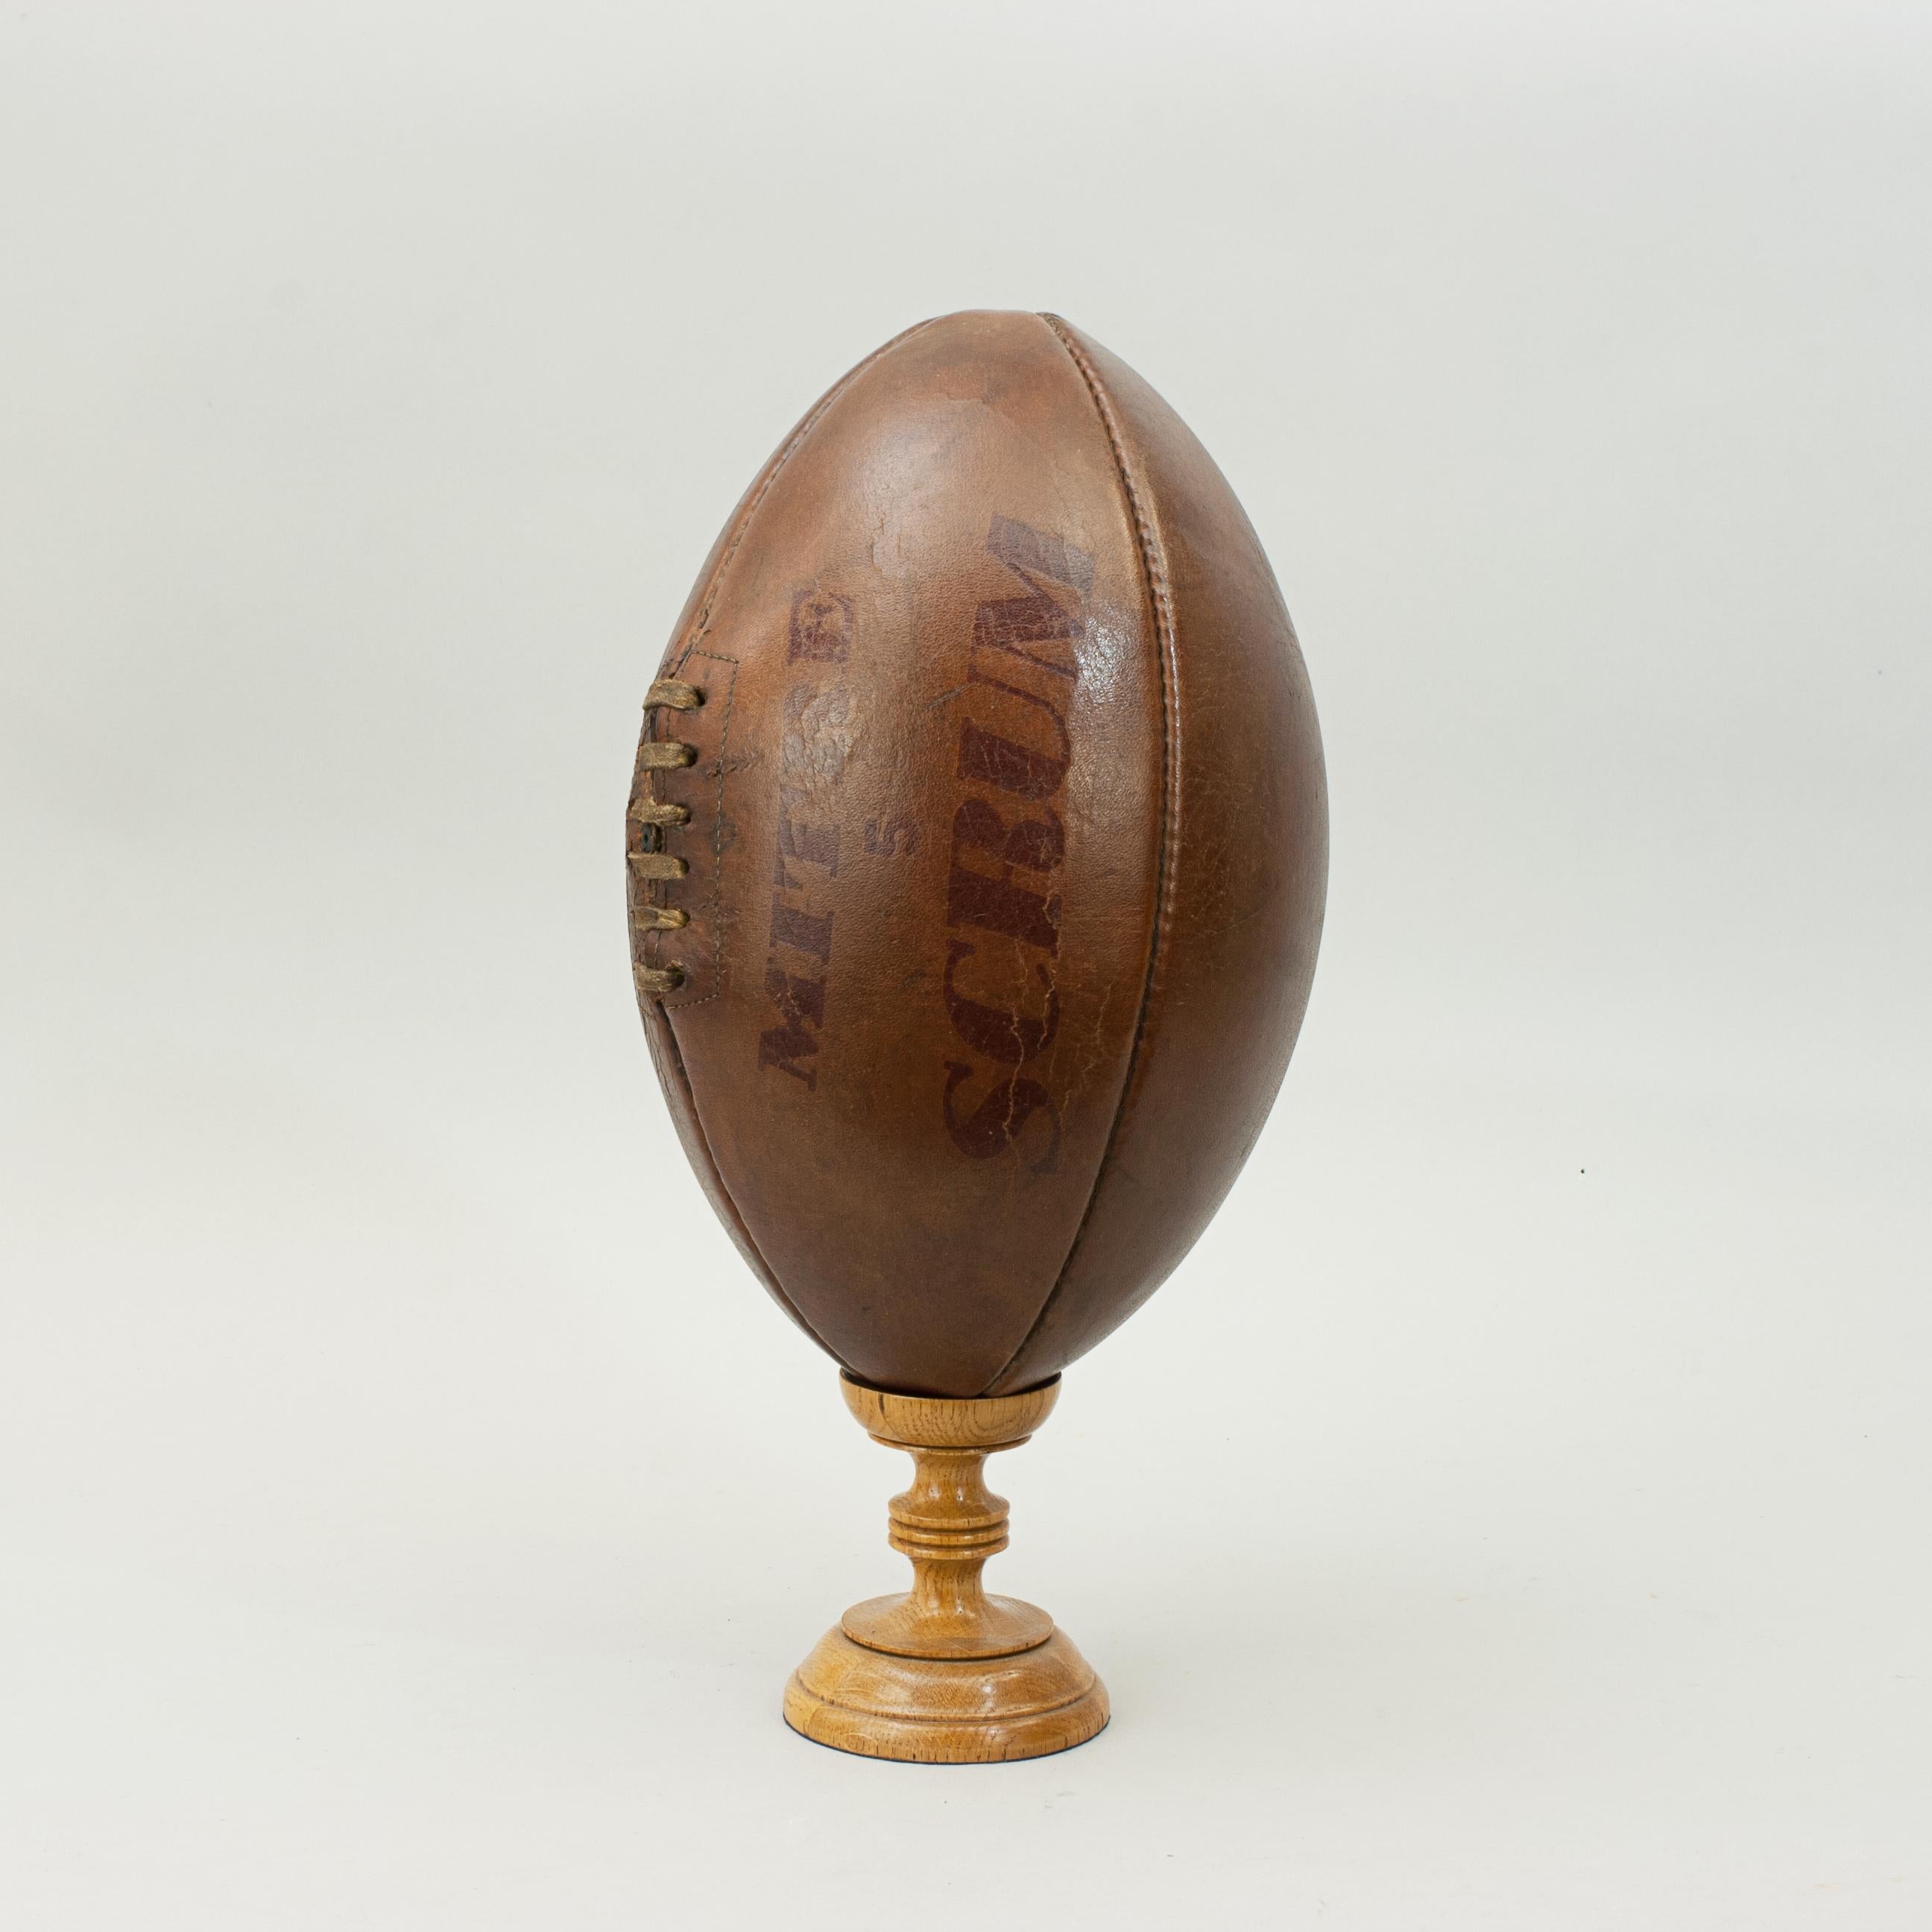 Vintage leather rugby ball.
A traditional Mitre No. 5 leather rugby ball with a lace-up slit to the top and valve for bladder inflation. The ball is with good brown color. A nice four-panel rugby ball embossed 'Mitre 5 Scrum' on one panel and